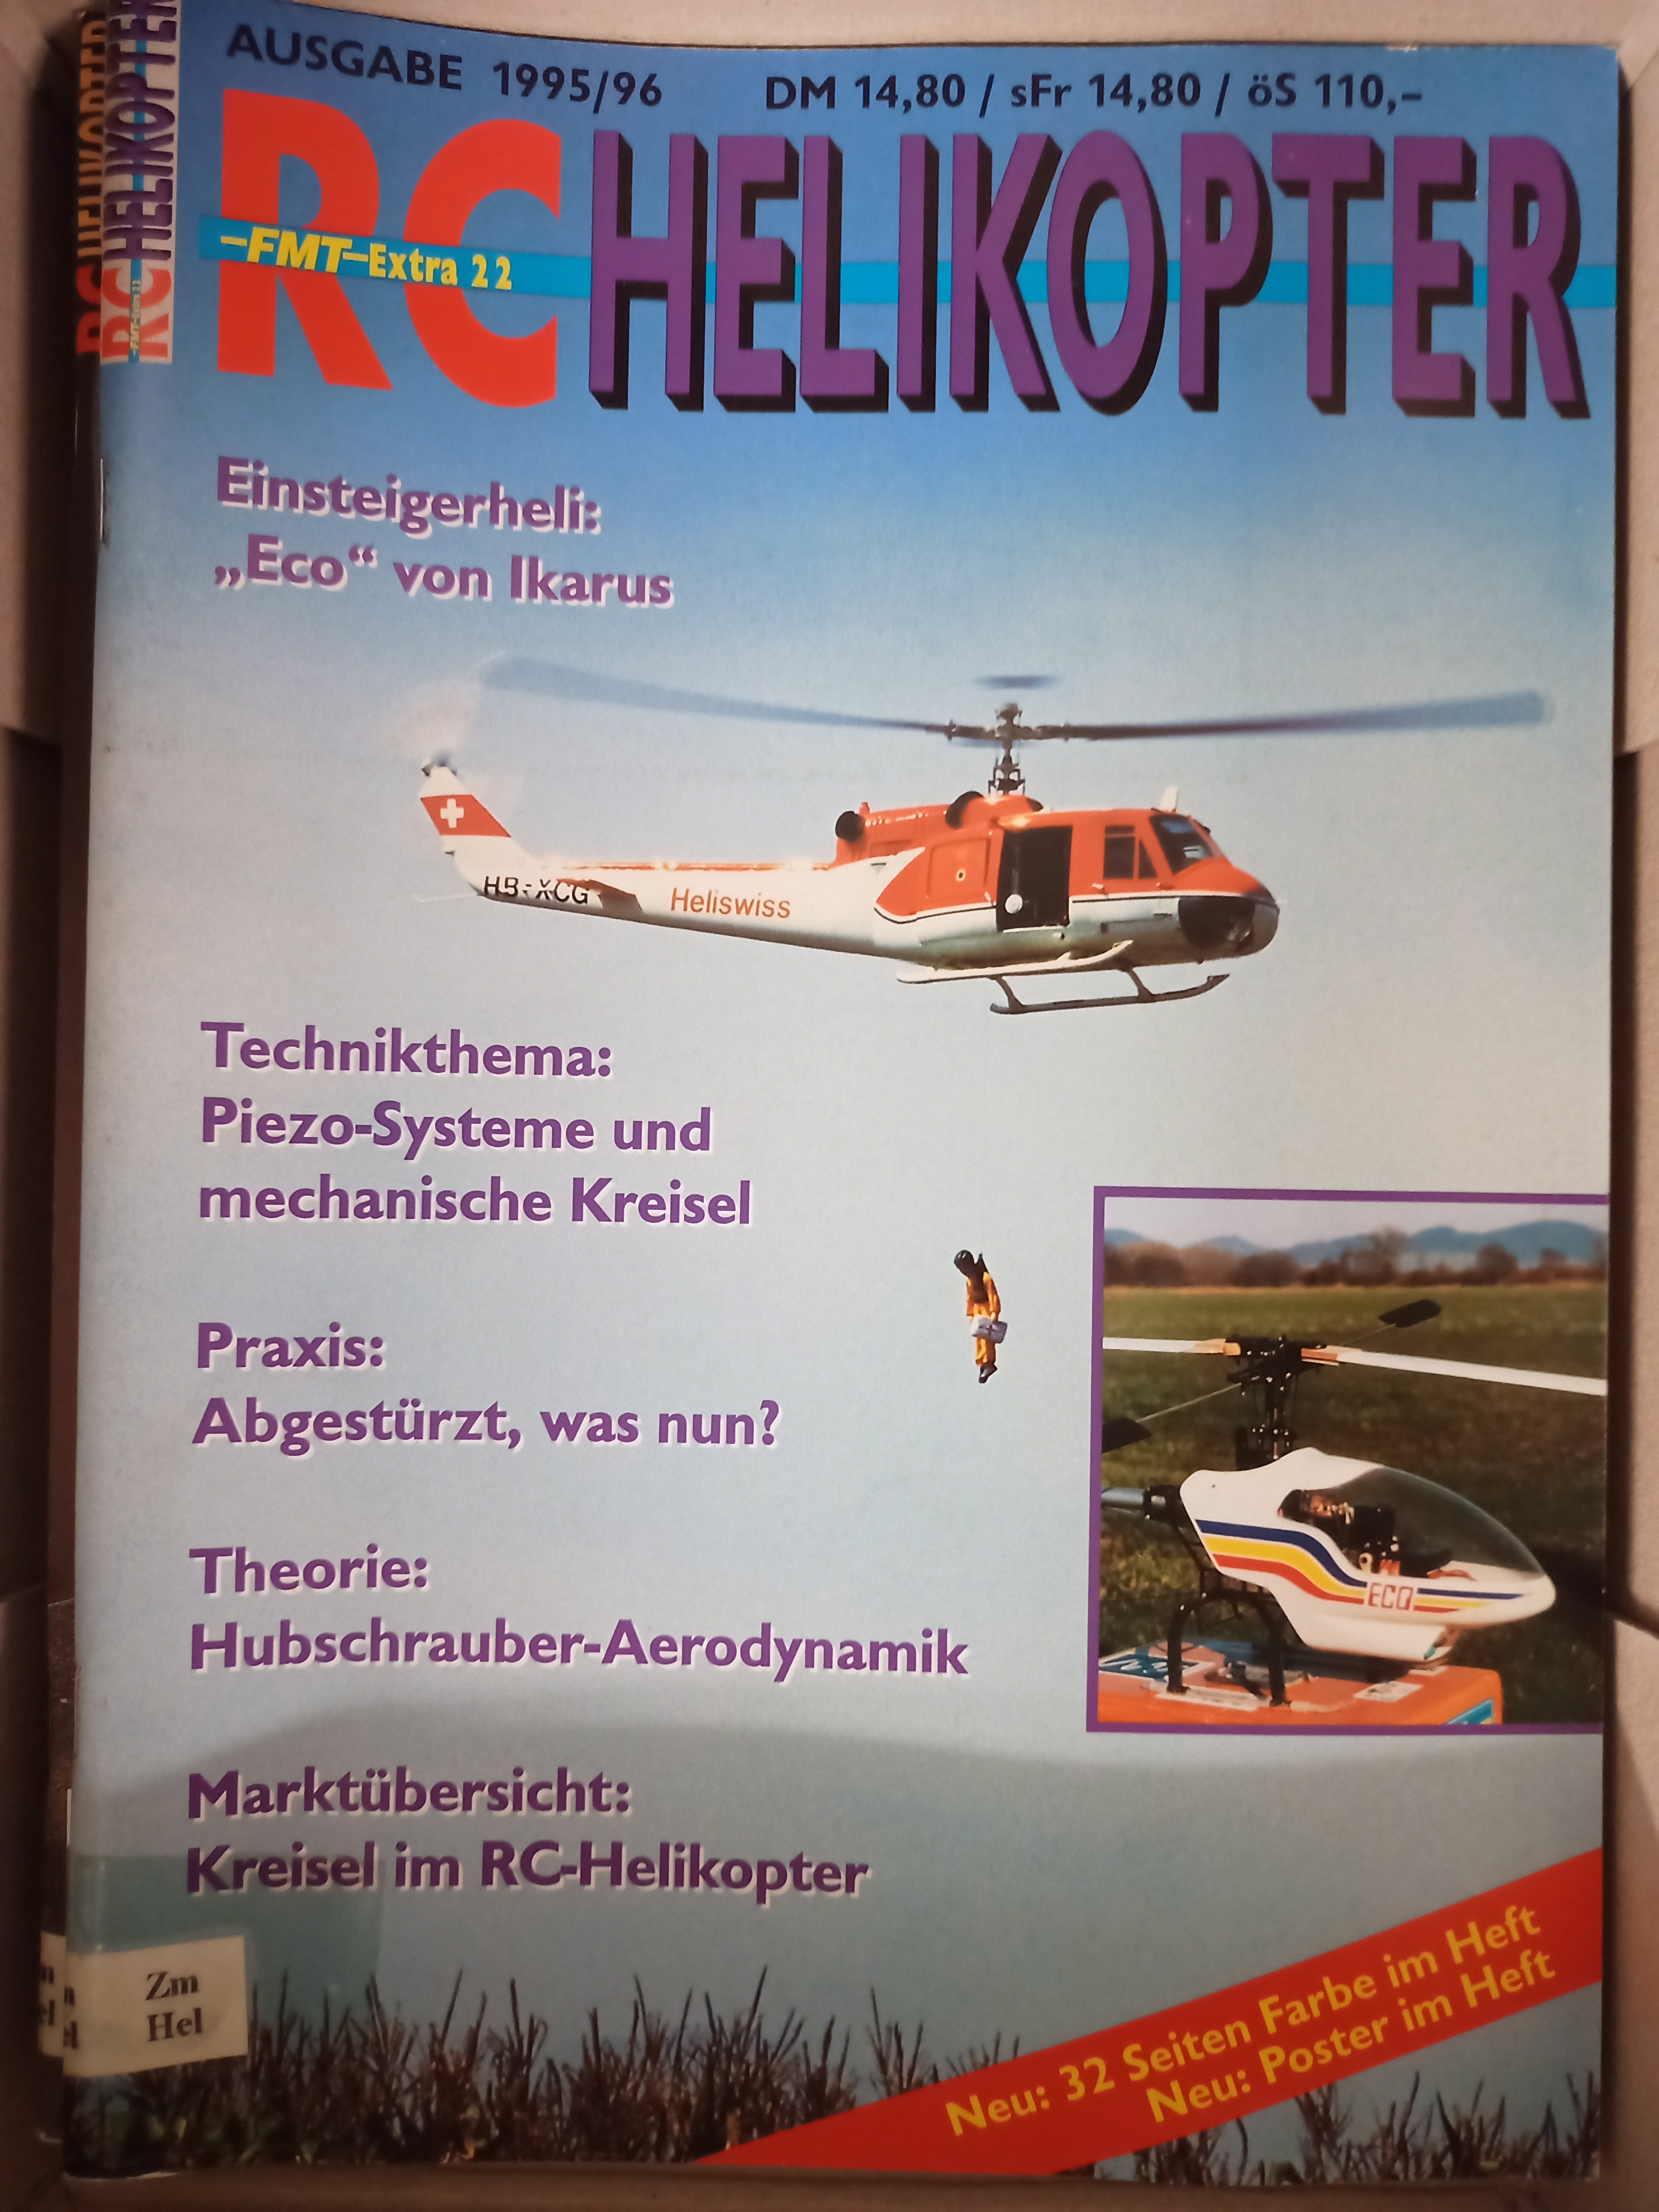 RC-Helicopter (Deutsches Segelflugmuseum mit Modellflug CC BY-NC-SA)